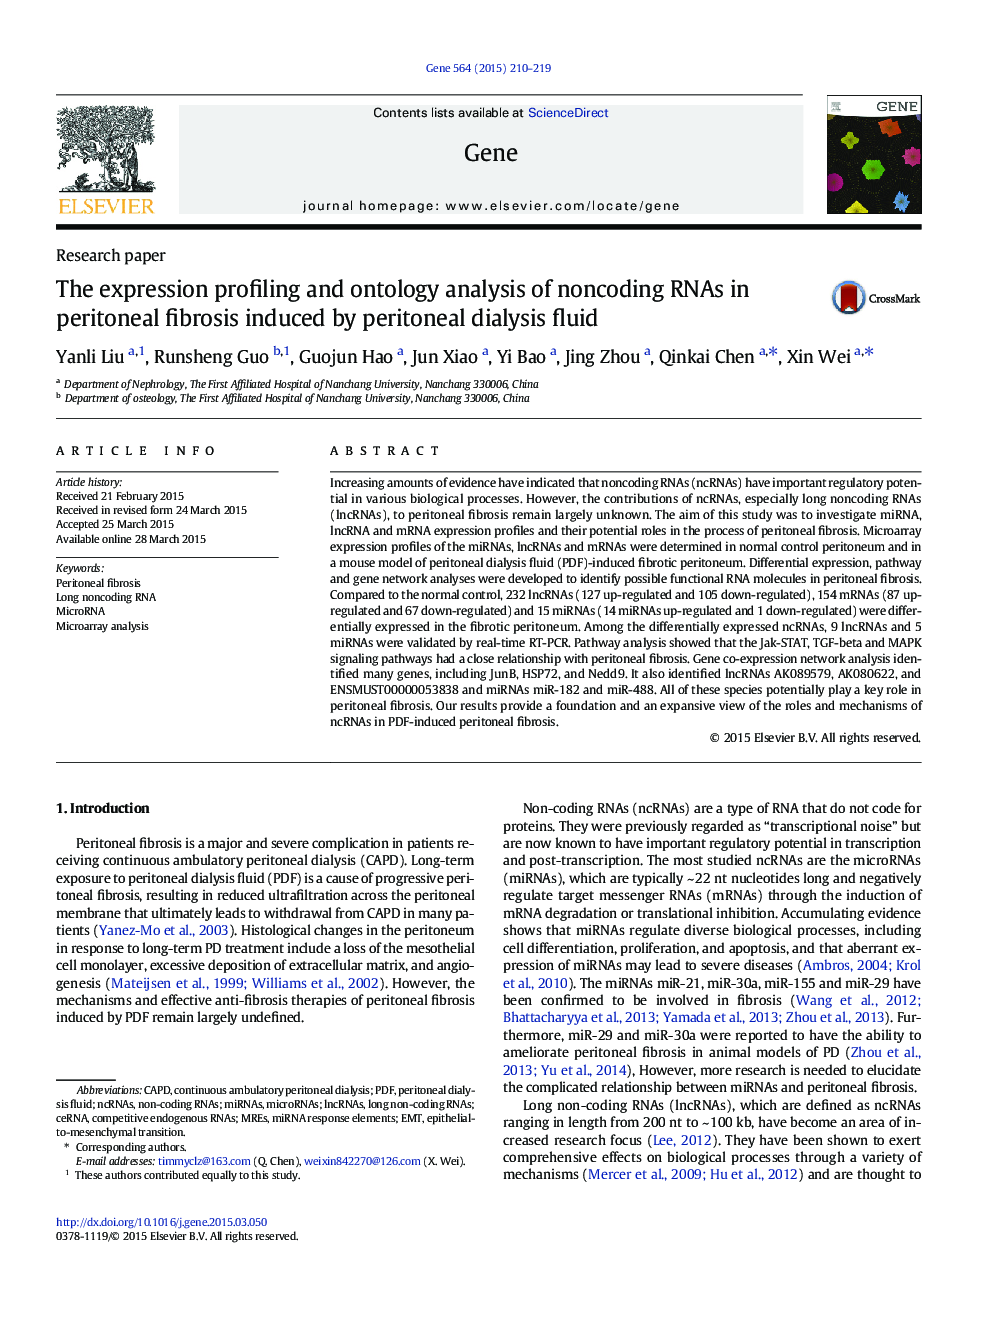 The expression profiling and ontology analysis of noncoding RNAs in peritoneal fibrosis induced by peritoneal dialysis fluid